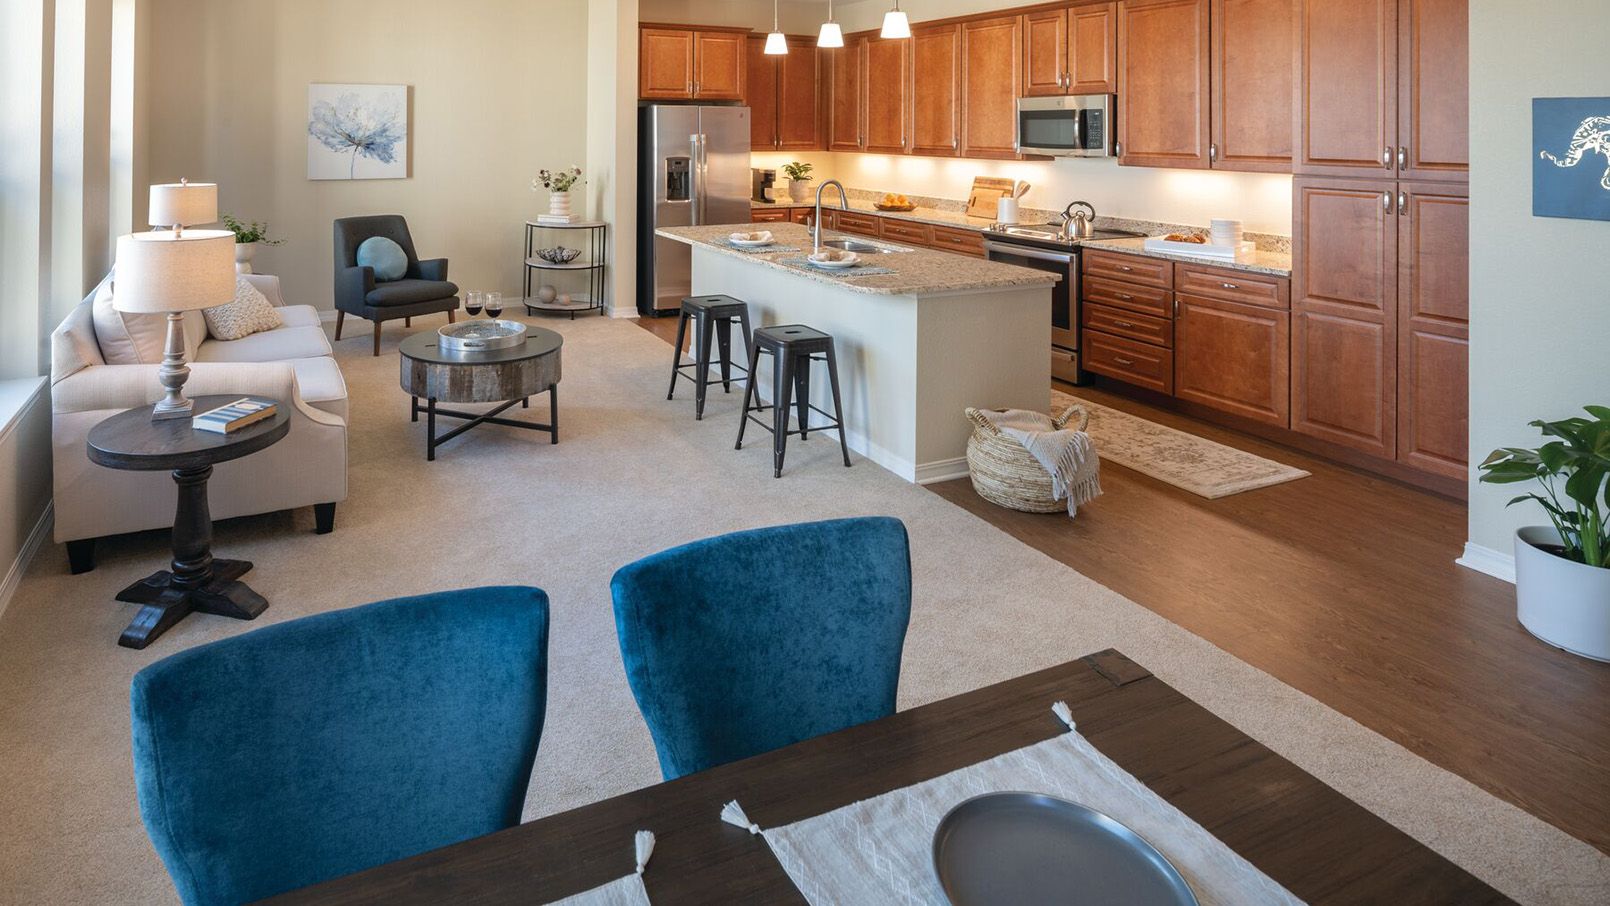 The Harbaugh Senior Apartments in Highlands Ranch Wind Crest